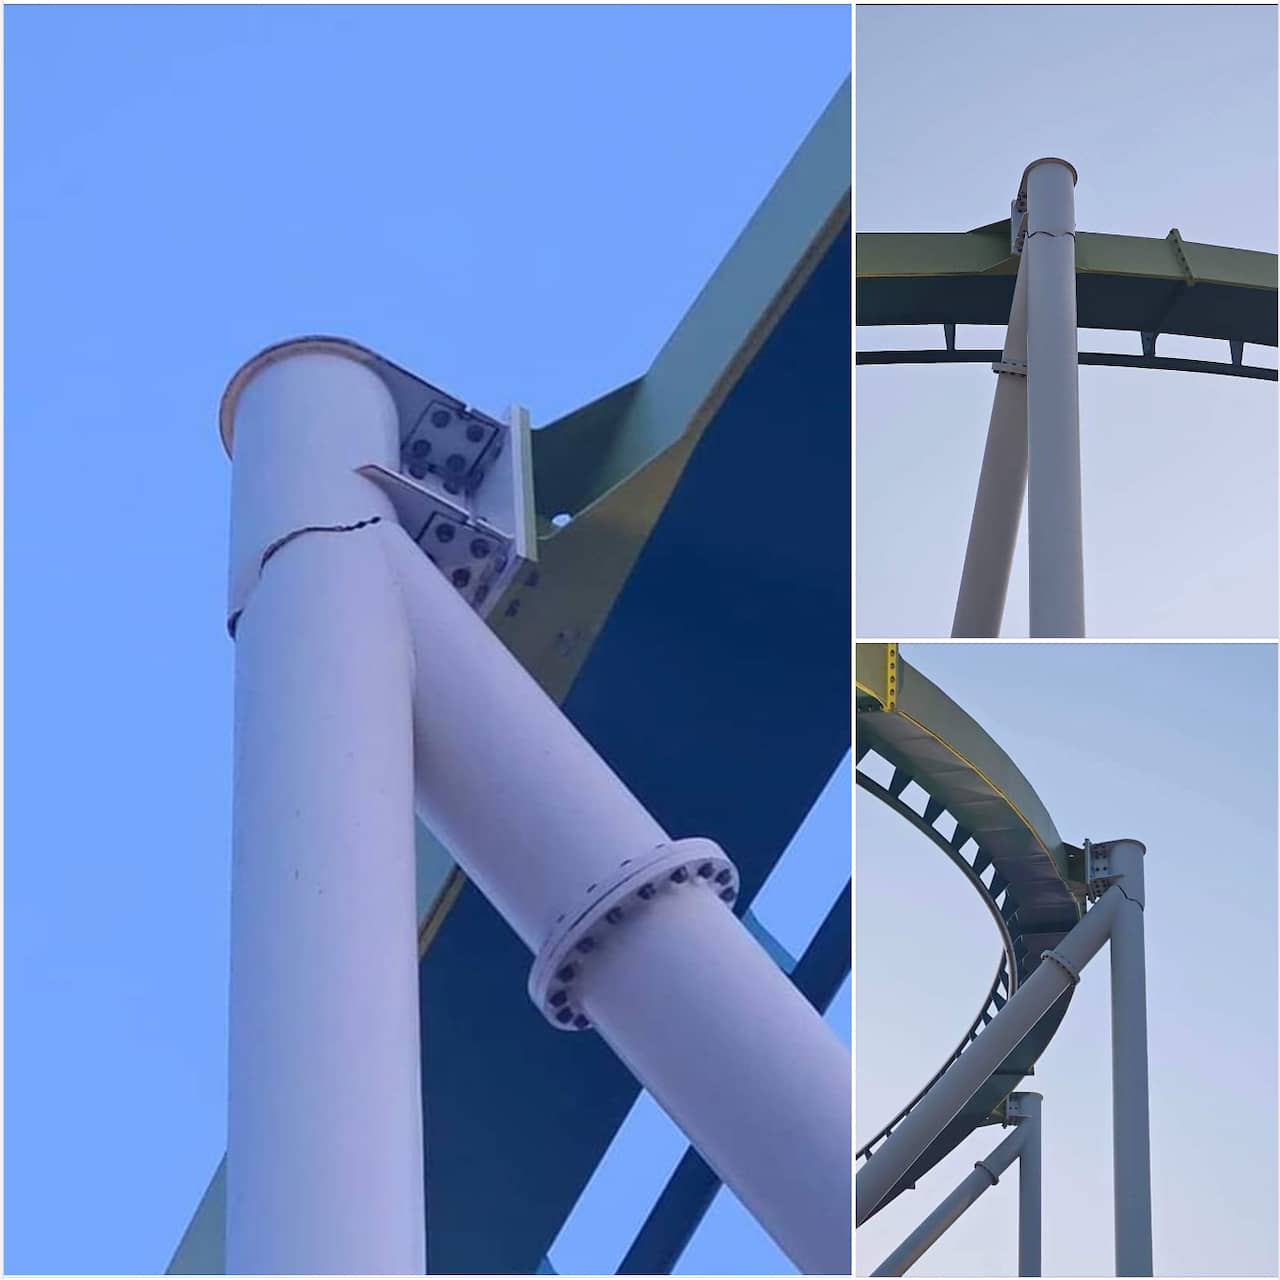 Crack closes one of the nation's top roller coasters